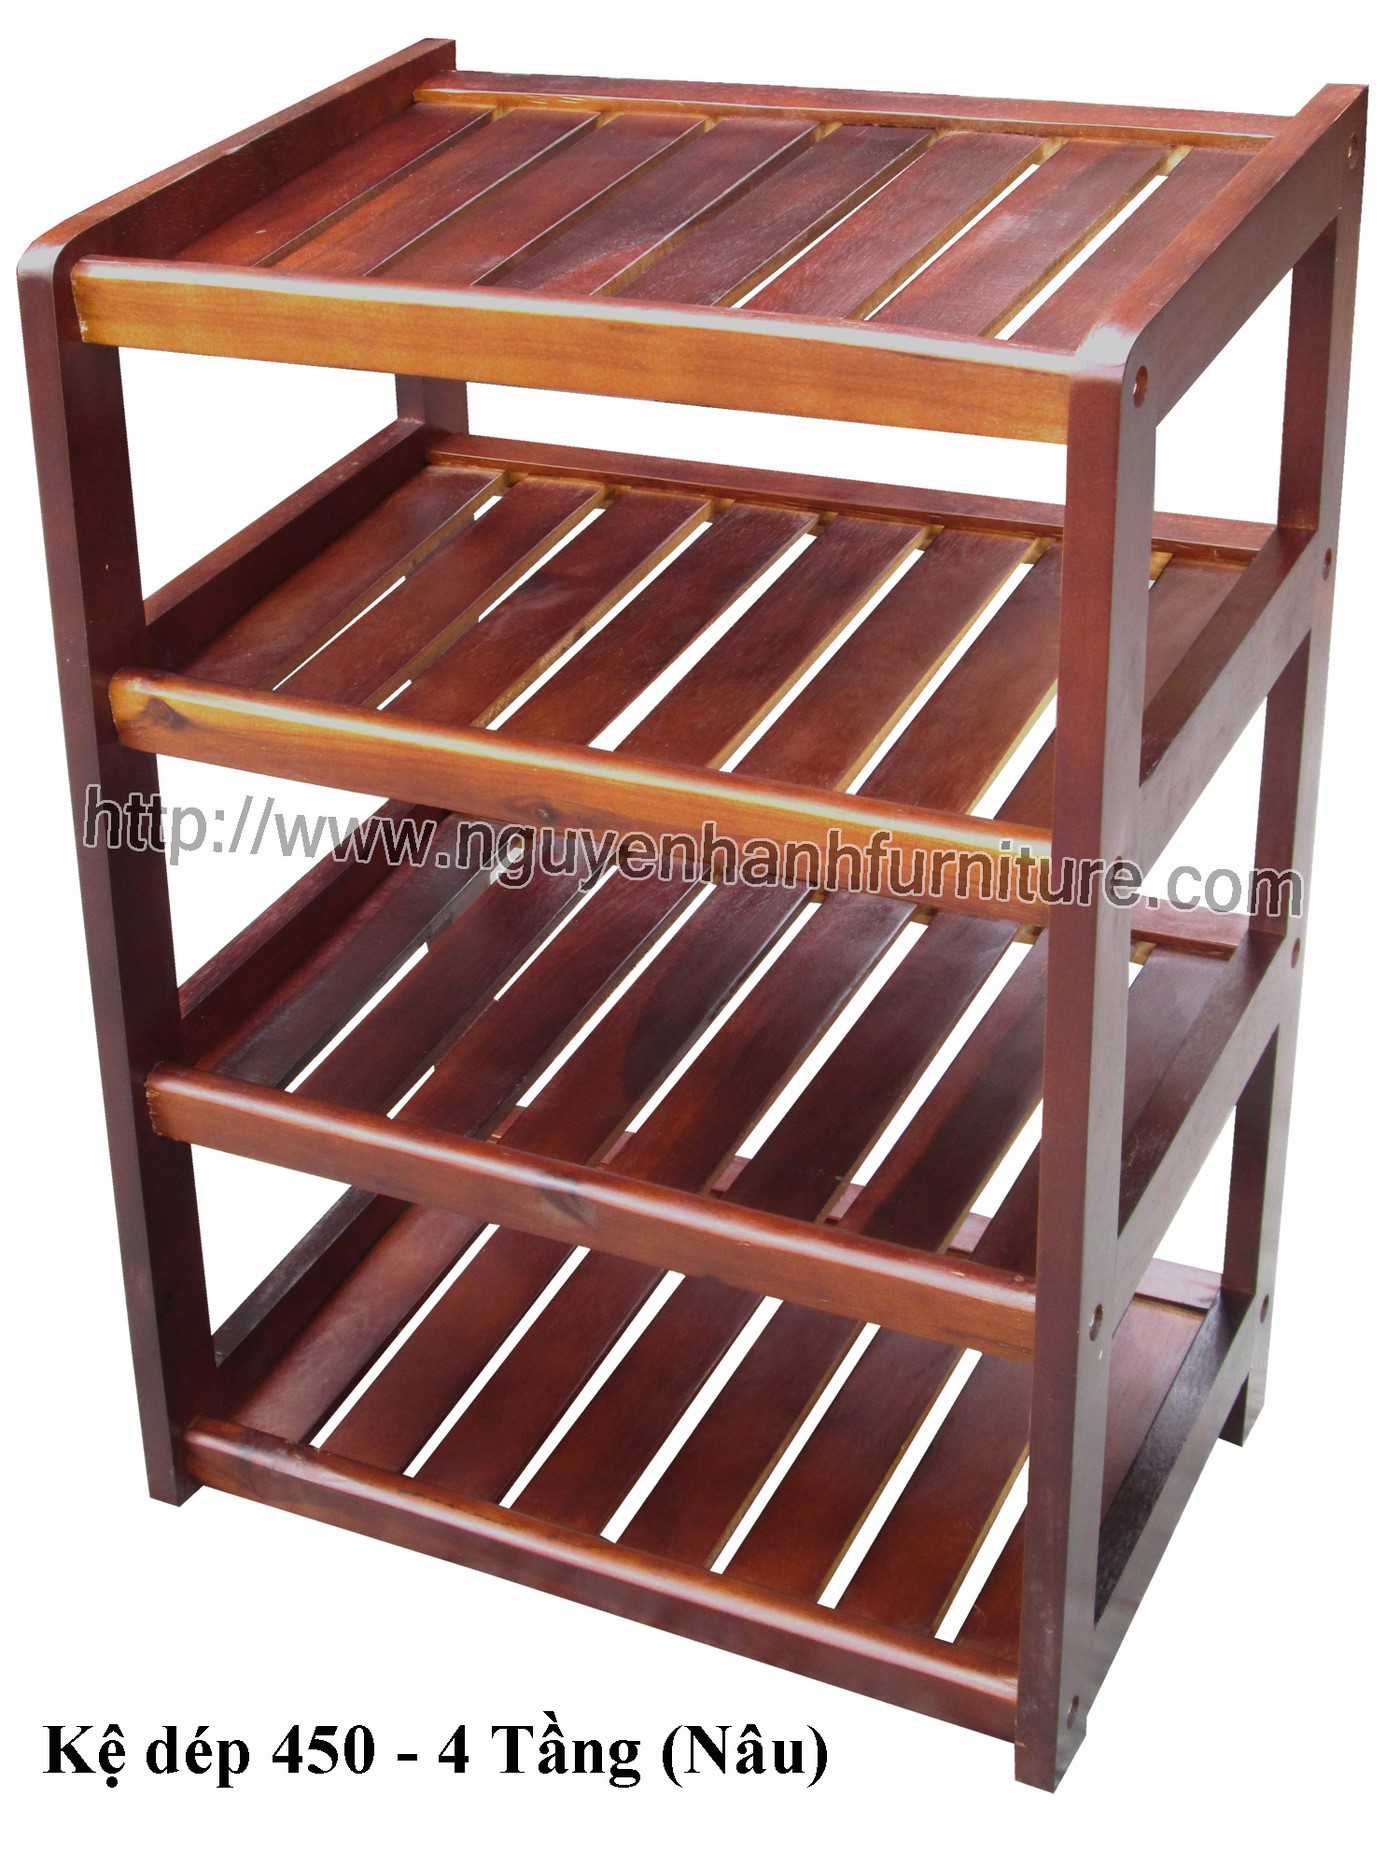 Name product: Shoeshelf 4 Floors 45 with sparse blades (Brown) - Dimensions: 45 x 30 x 62 (H) - Description: Wood natural rubber